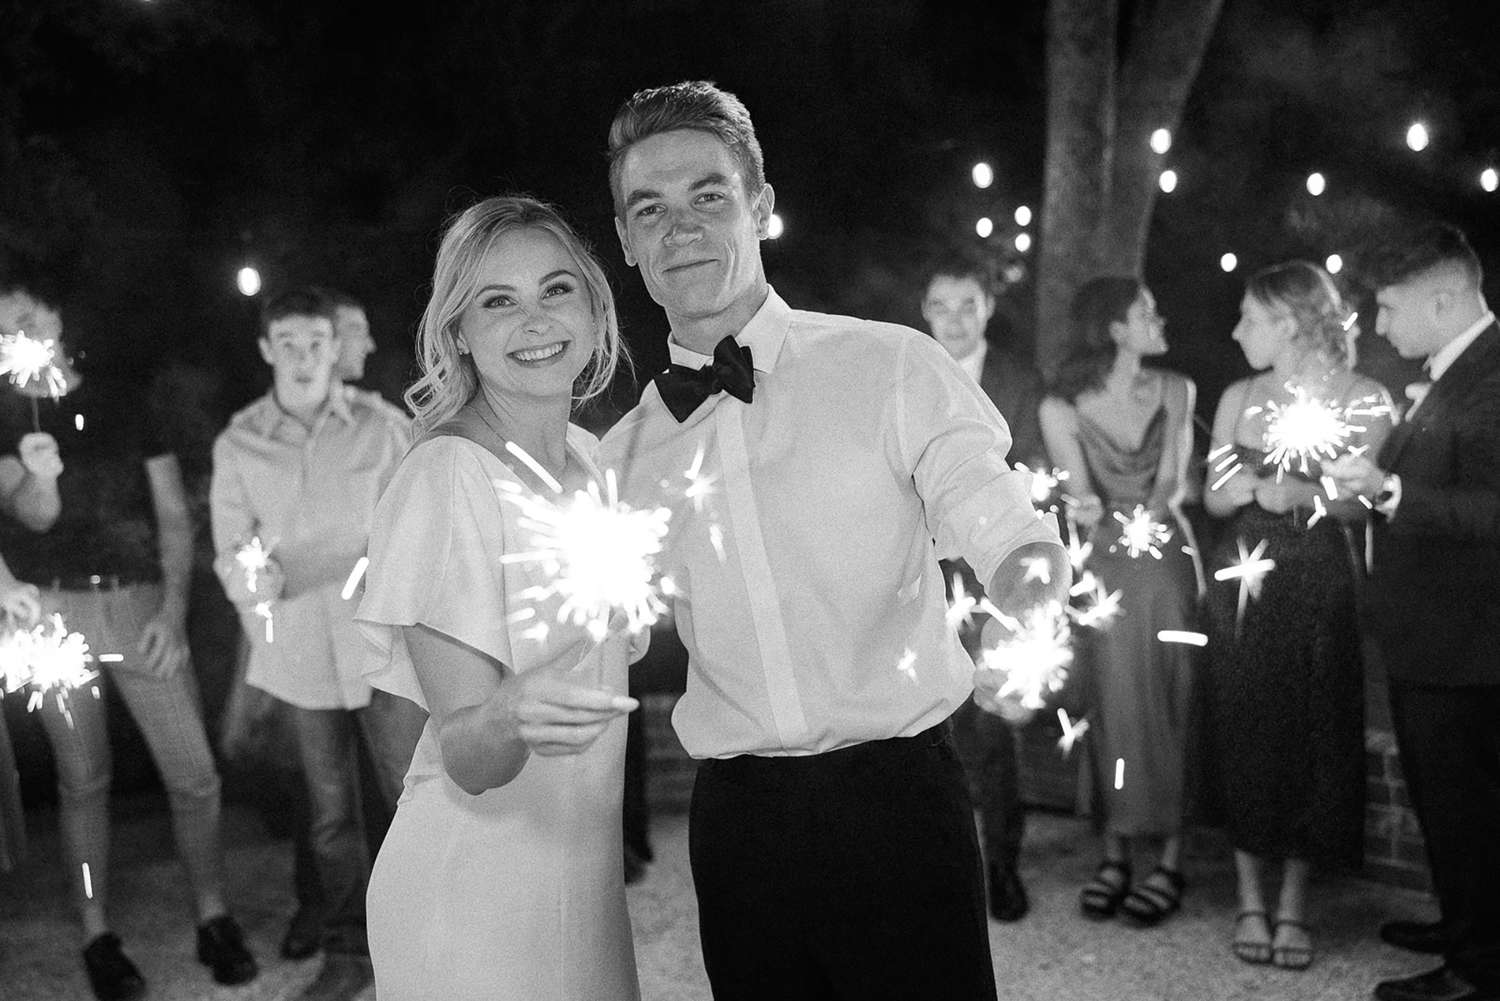  See All the Photos from Lucas Adams & Shelby Wulfert's Intimate Texas Wedding 